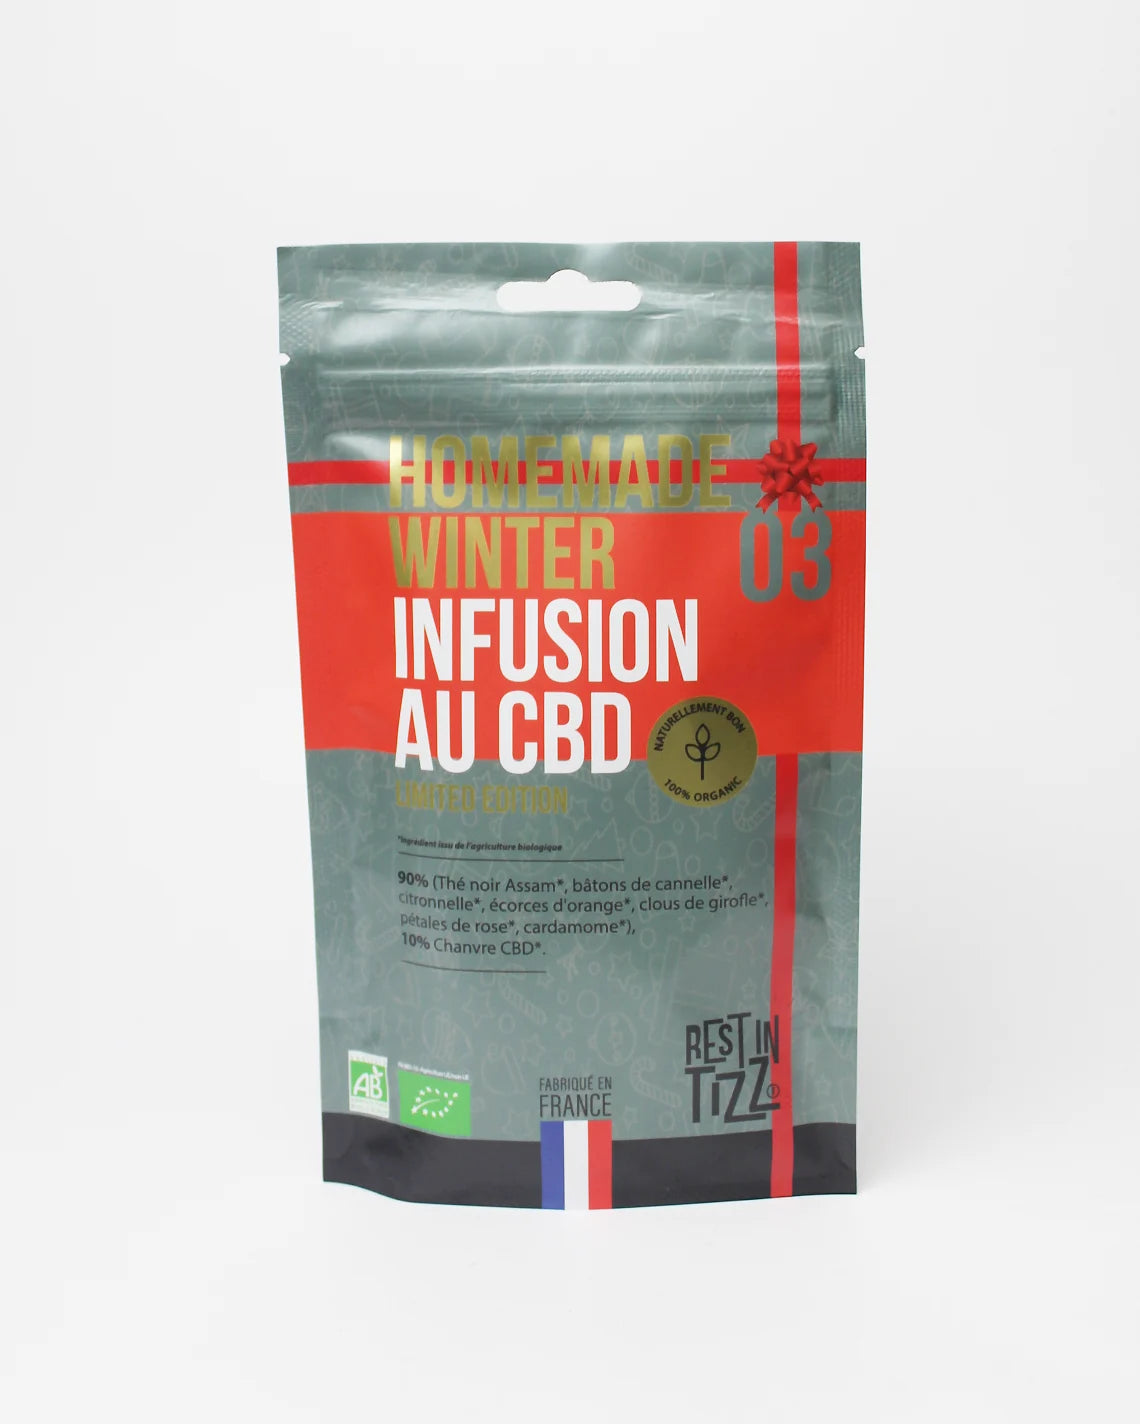 infusion CBD homemade winter rest in tizz